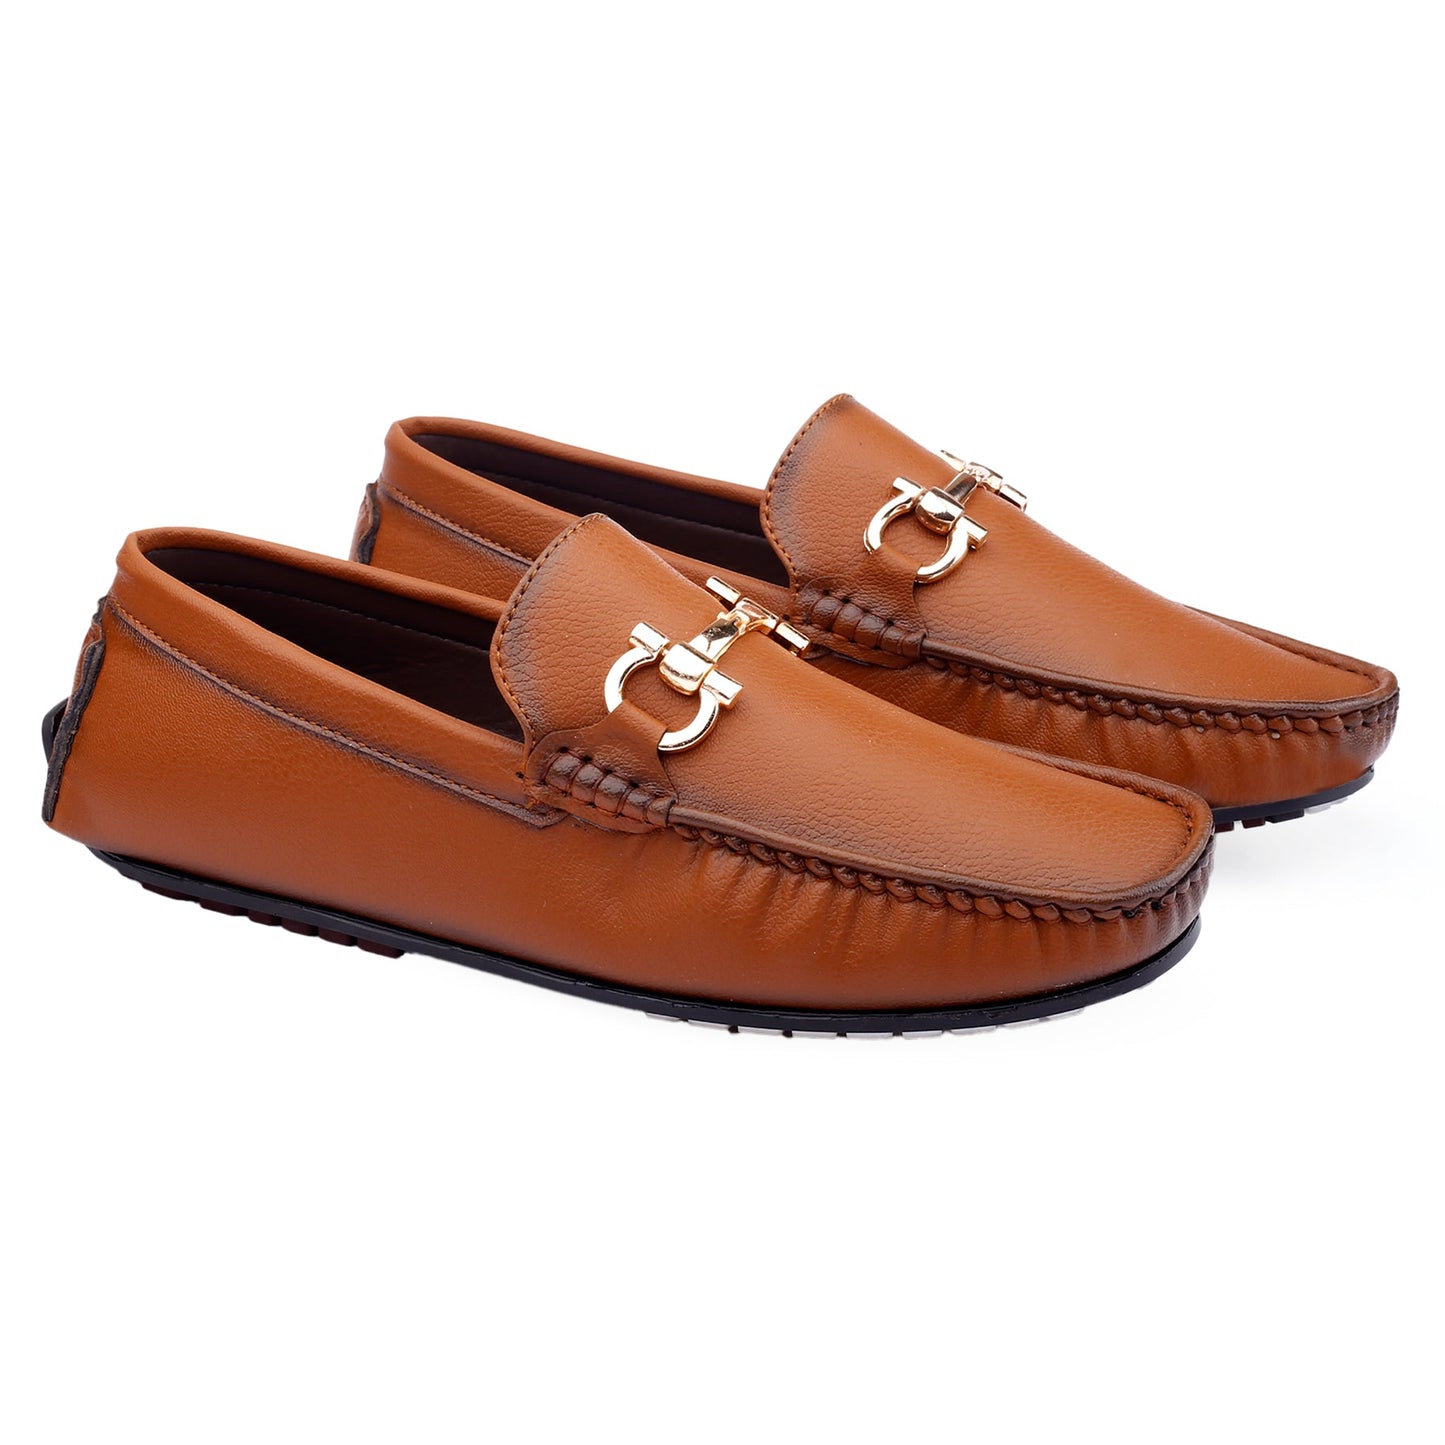 Men's Faux Leather Buckle Designer Loafers Shoes